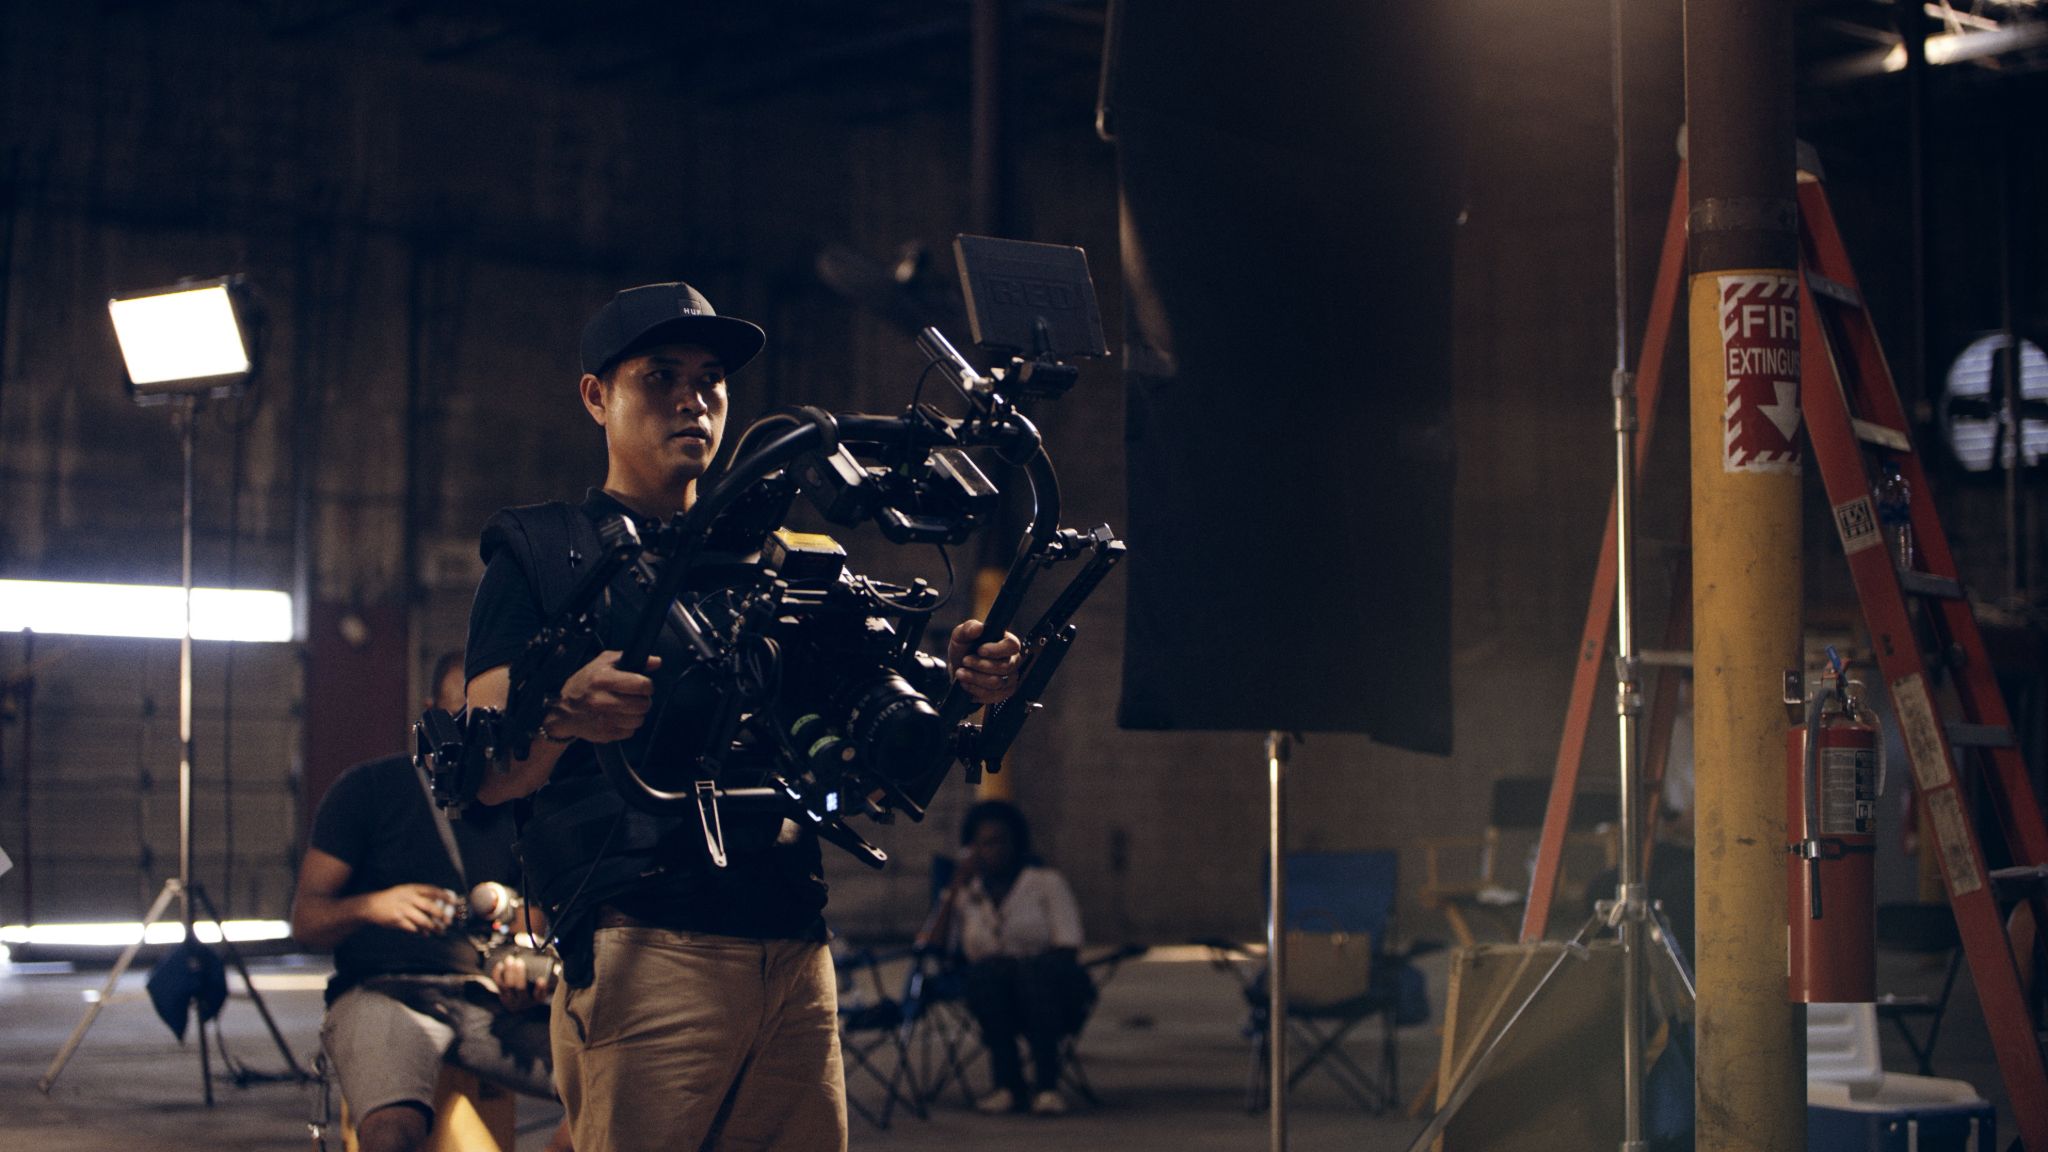 Crew member using a video camera on a set